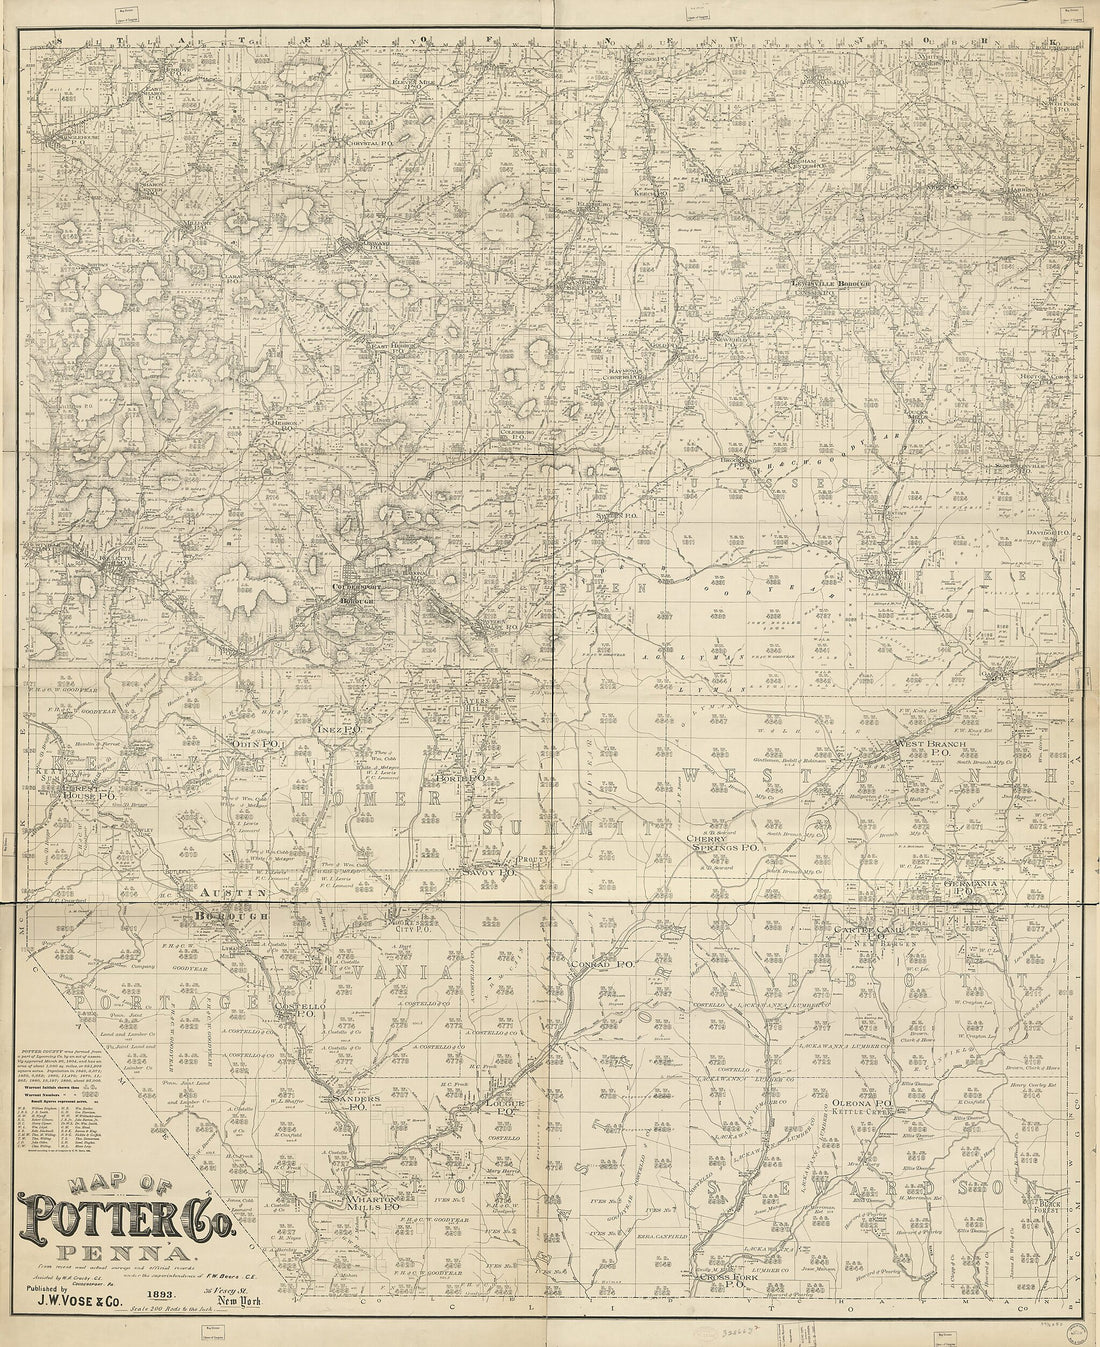 This old map of Map of Potter County, Penna. : from Recent and Actual Surveys and Official Records from 1893 was created by F. W. (Frederick W.) Beers, W. A. Crosby,  J.W. Vose &amp; Co in 1893